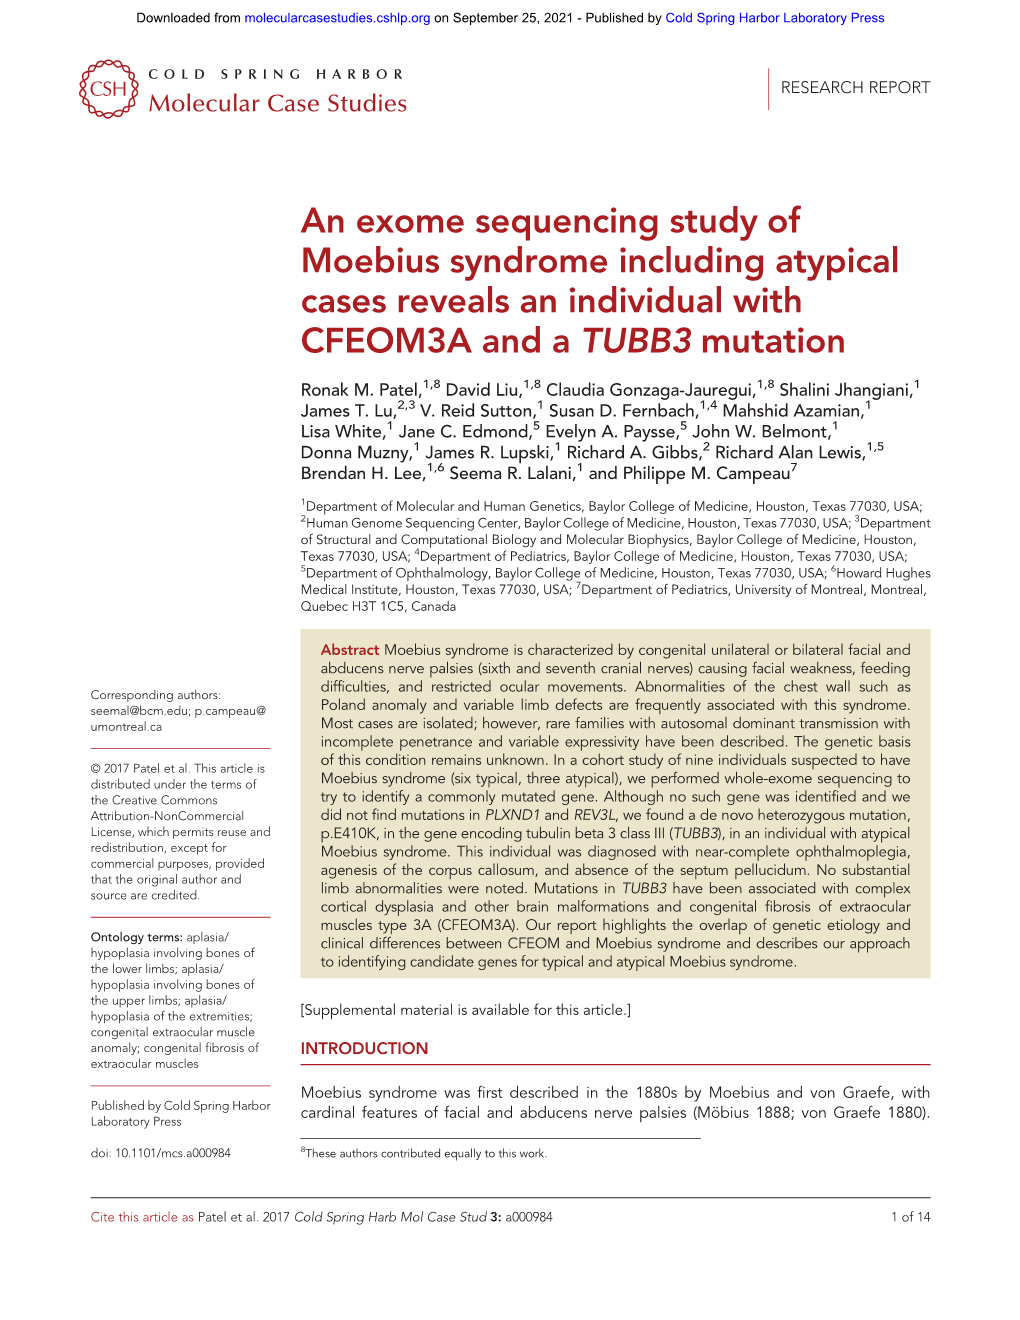 An Exome Sequencing Study of Moebius Syndrome Including Atypical Cases Reveals an Individual with CFEOM3A and a TUBB3 Mutation